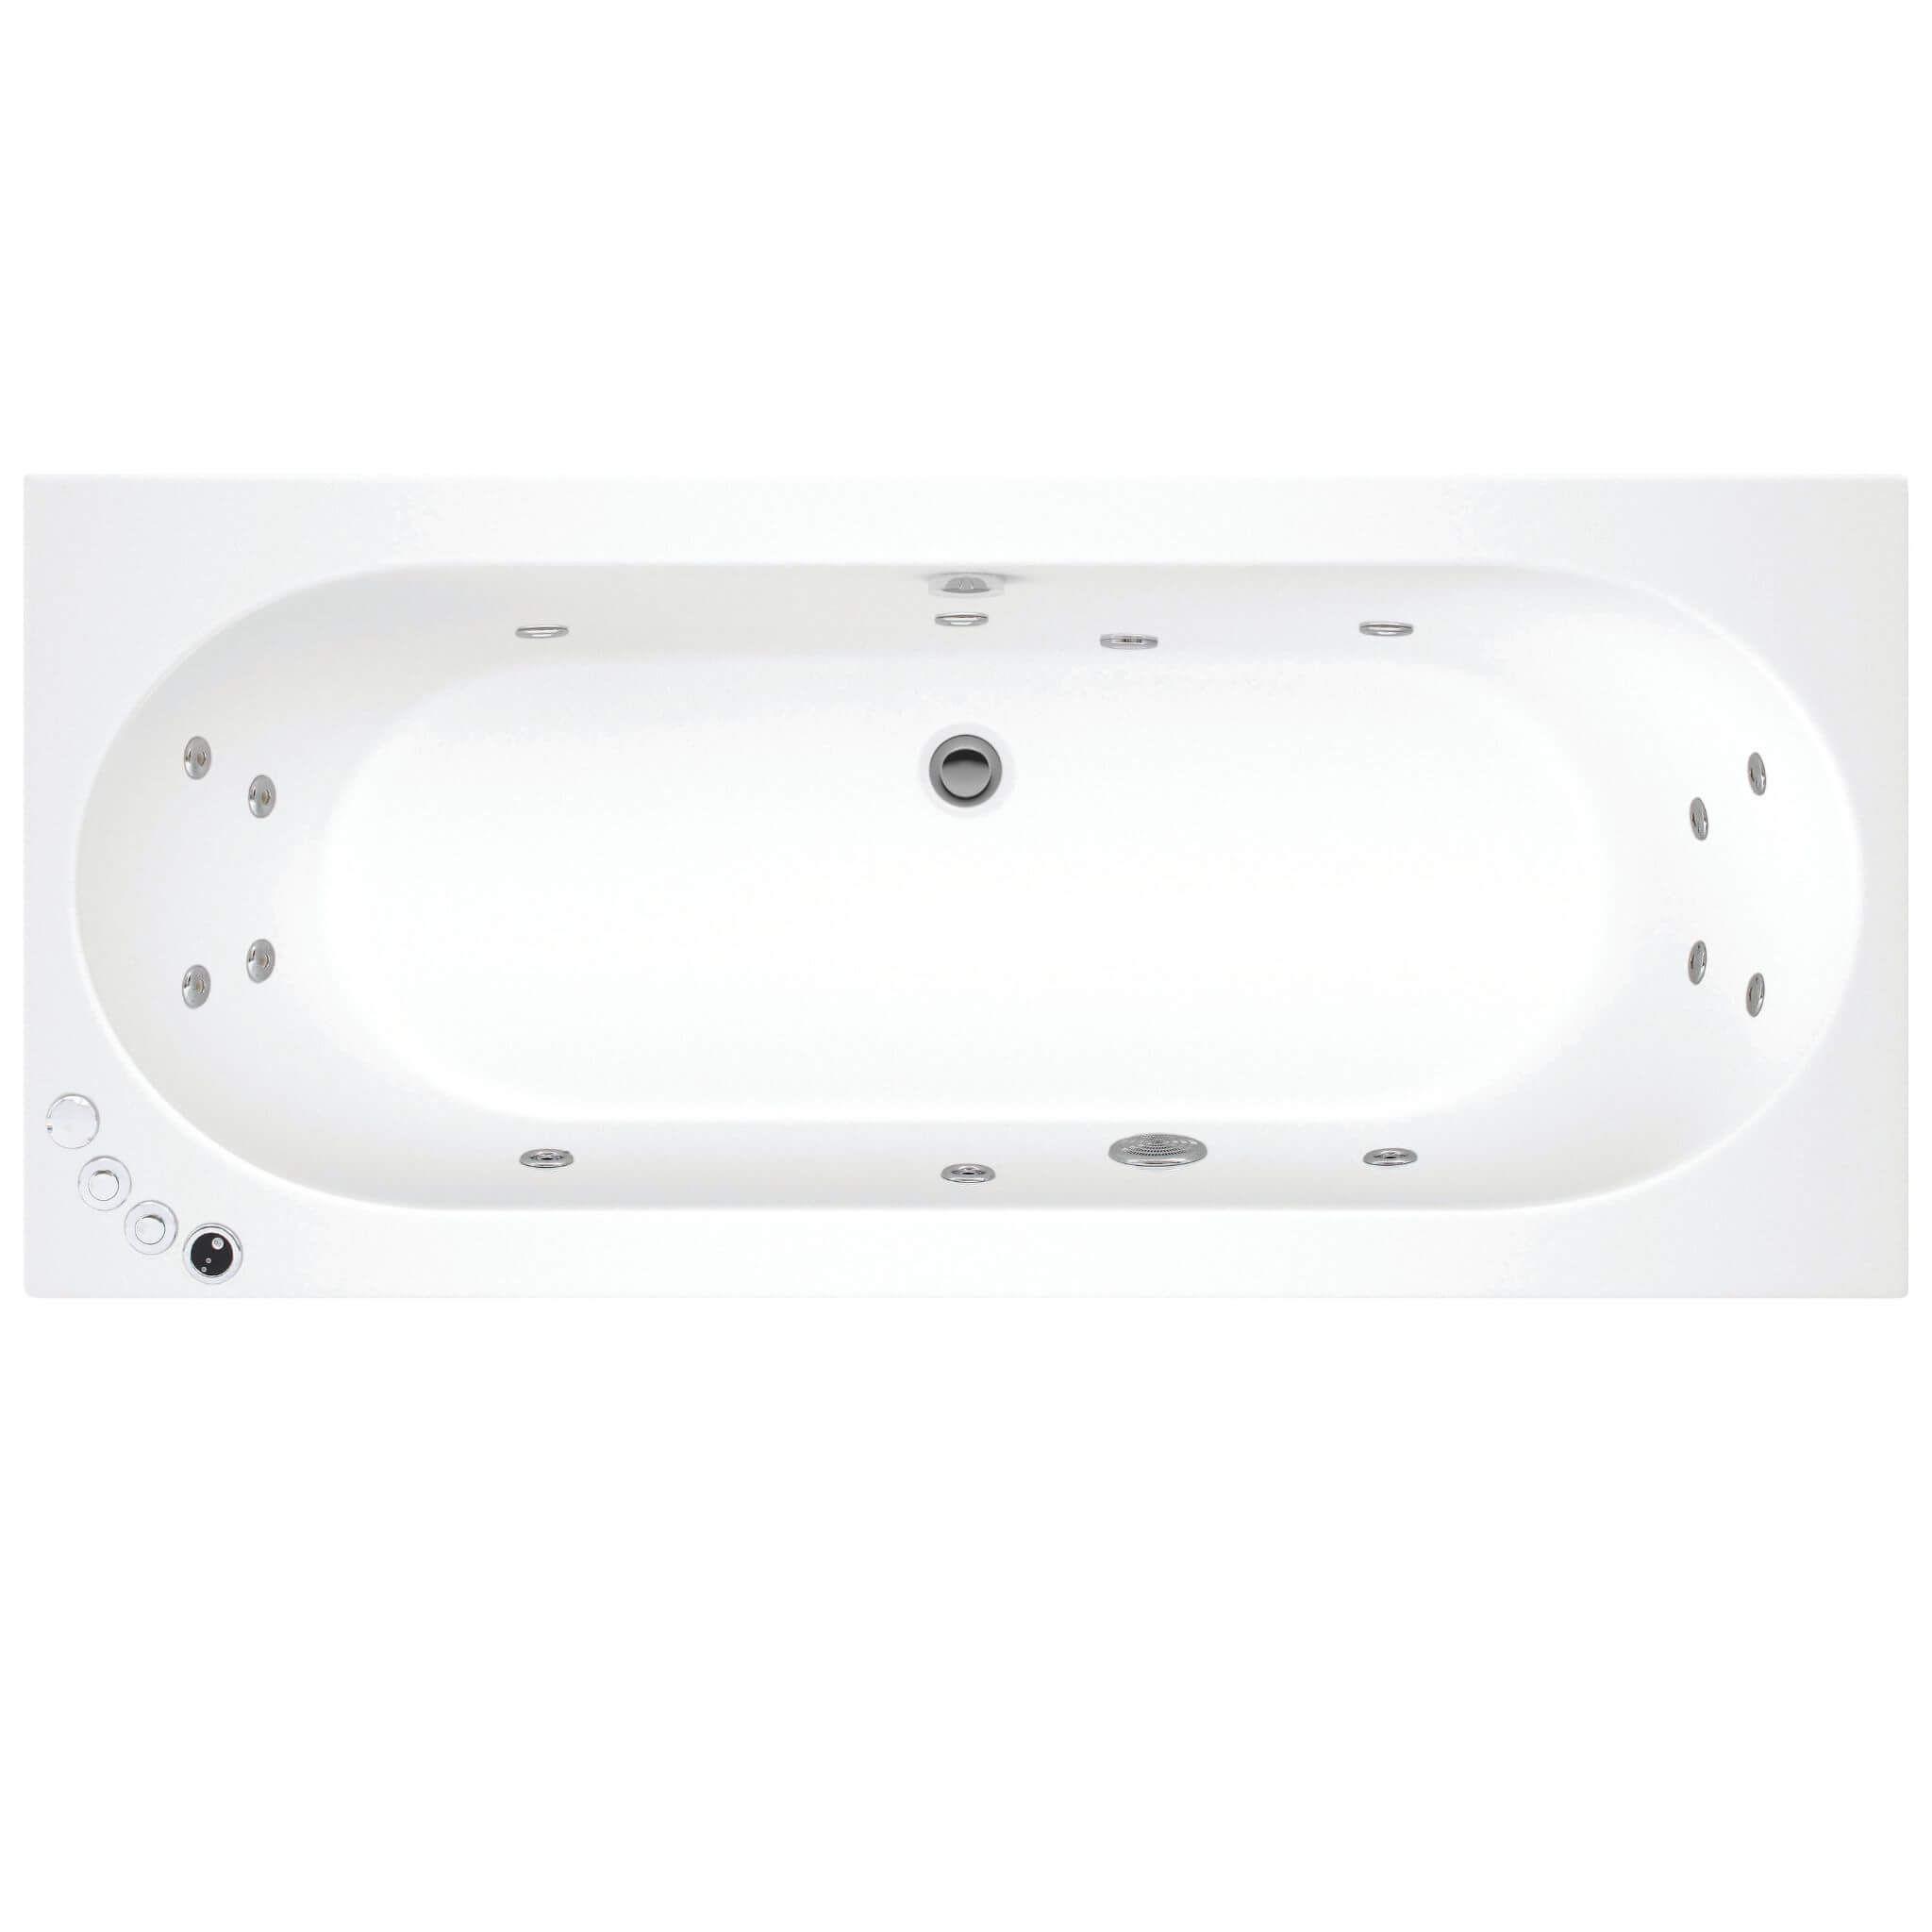 An image of Lisna Waters Maple 1700Mm X 750Mm Double Ended Whirlpool Bath & Air Spa Bath 14 ...